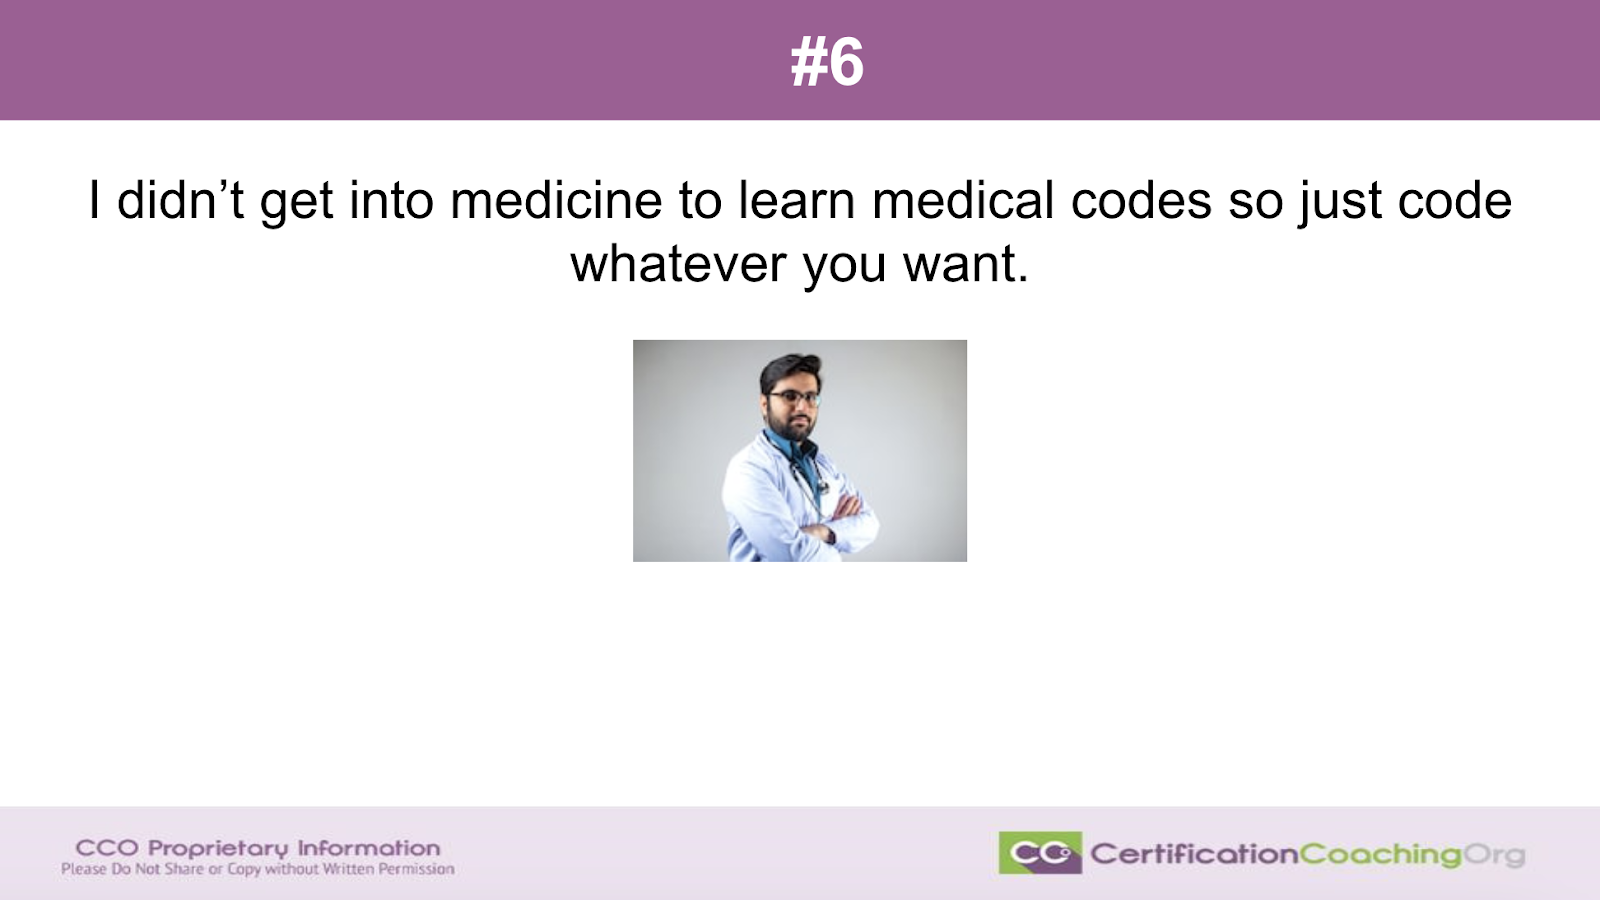 #6 I Didn't Get Into Medicine To Learn Medical Codes. So Just Code Whatever You Want